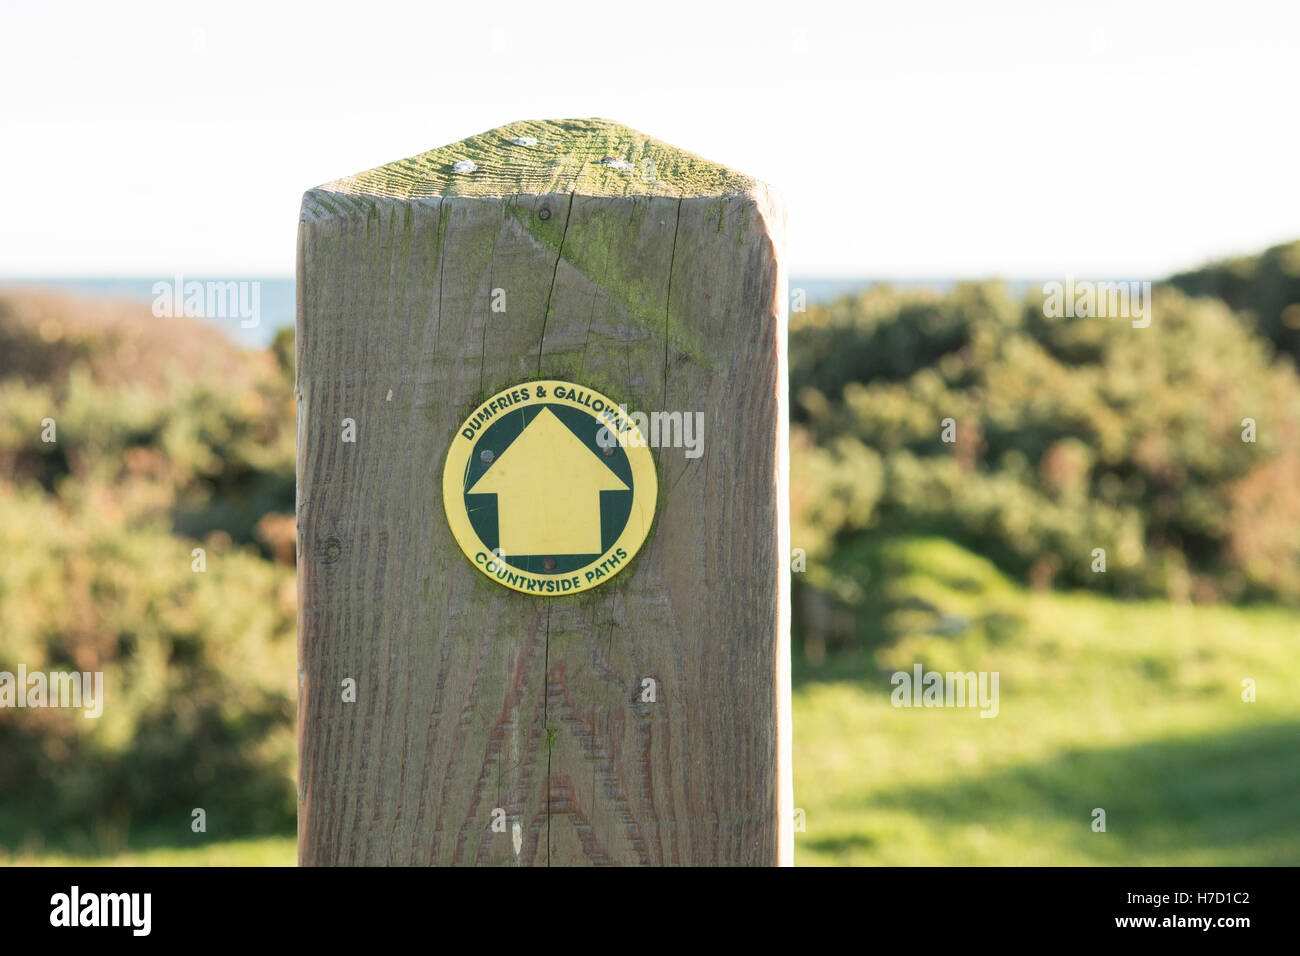 Dumfries and Galloway Countryside Paths marker Stock Photo